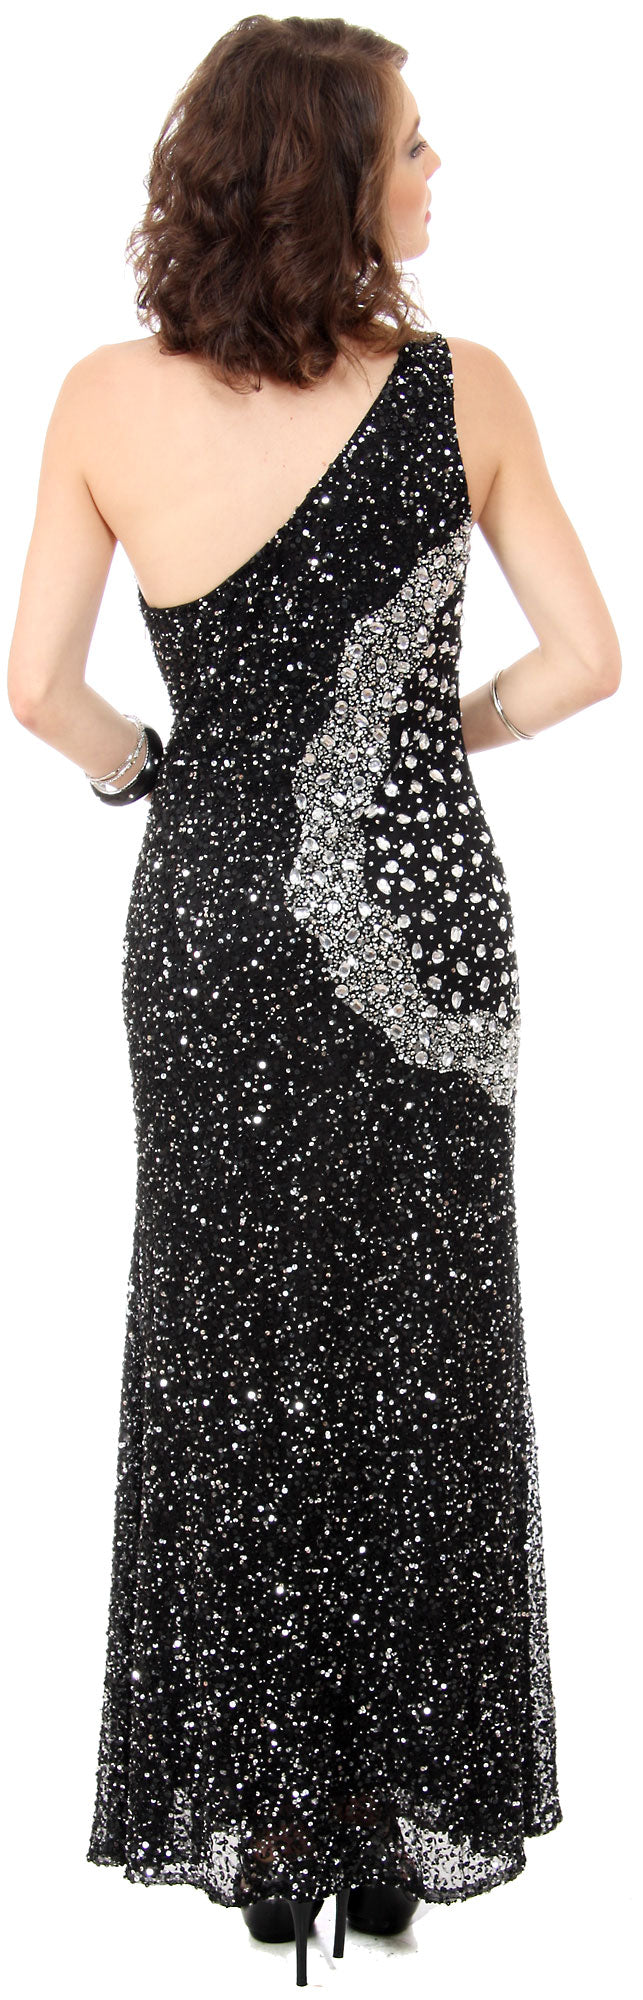 Image of Long Sequined Formal Prom Dress With Rhinestones Waist back in Black/Silver